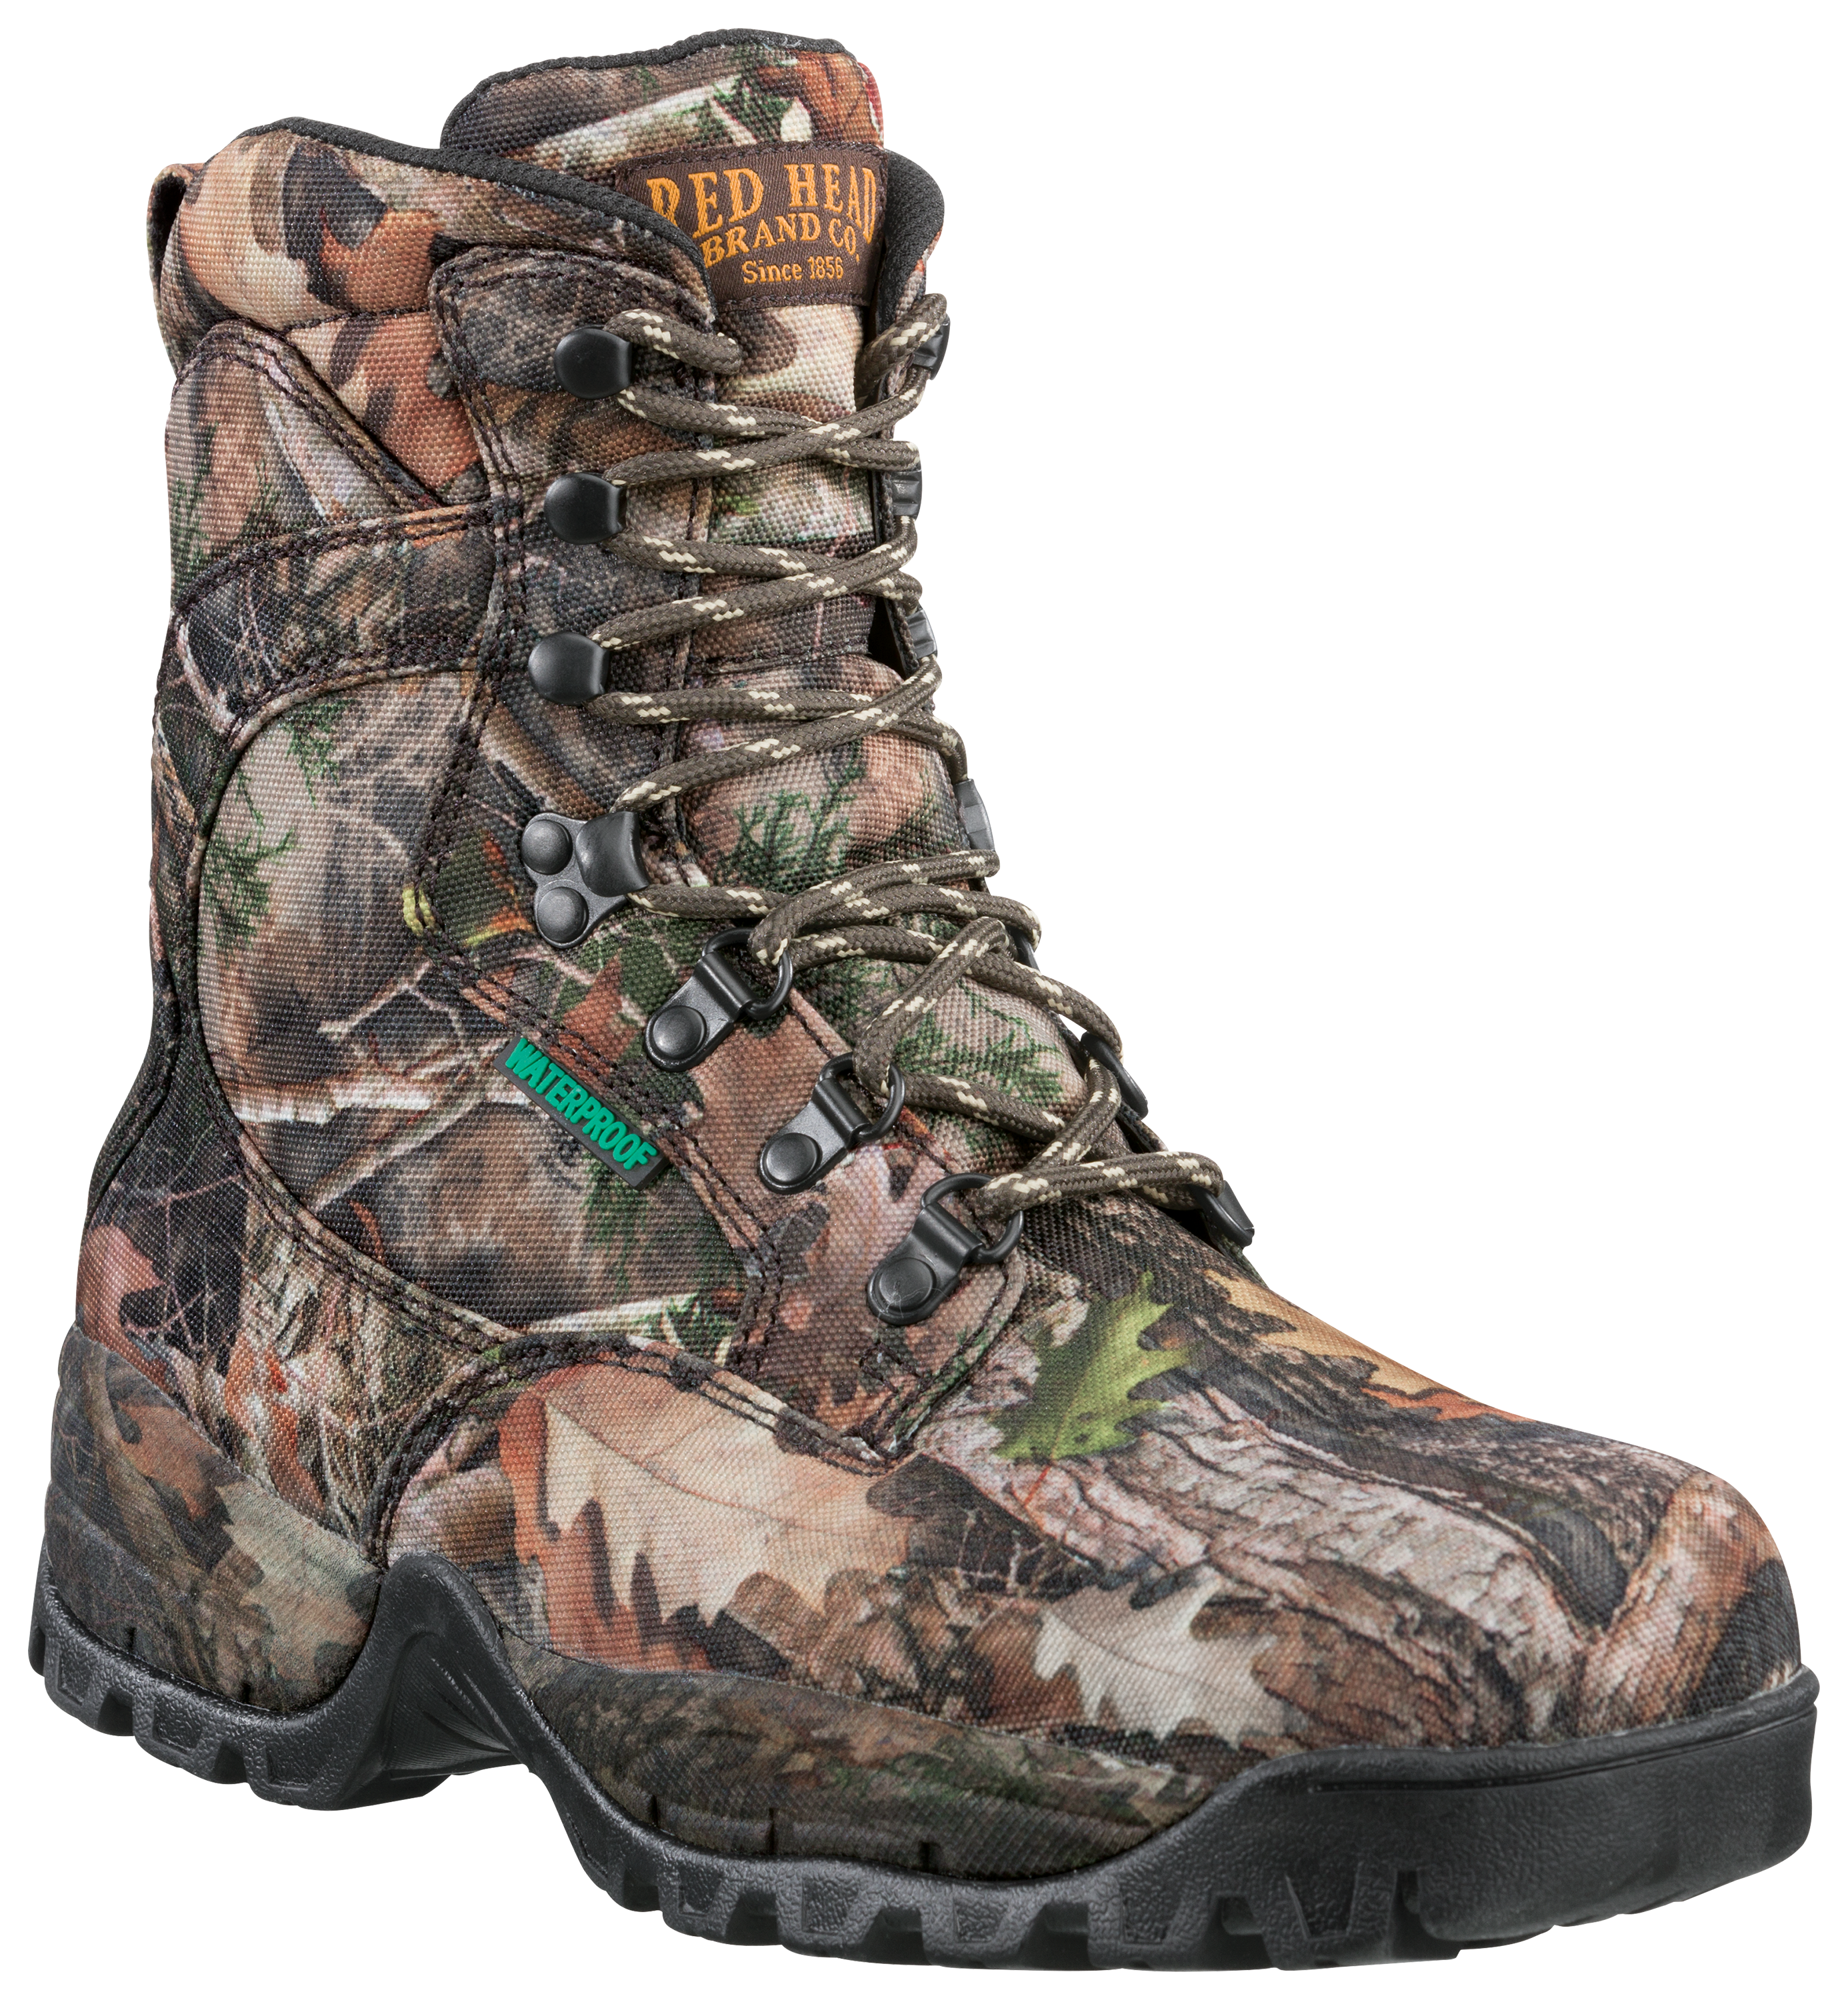 RedHead Big Timber Insulated Waterproof Hunting Boots for Men | Bass ...